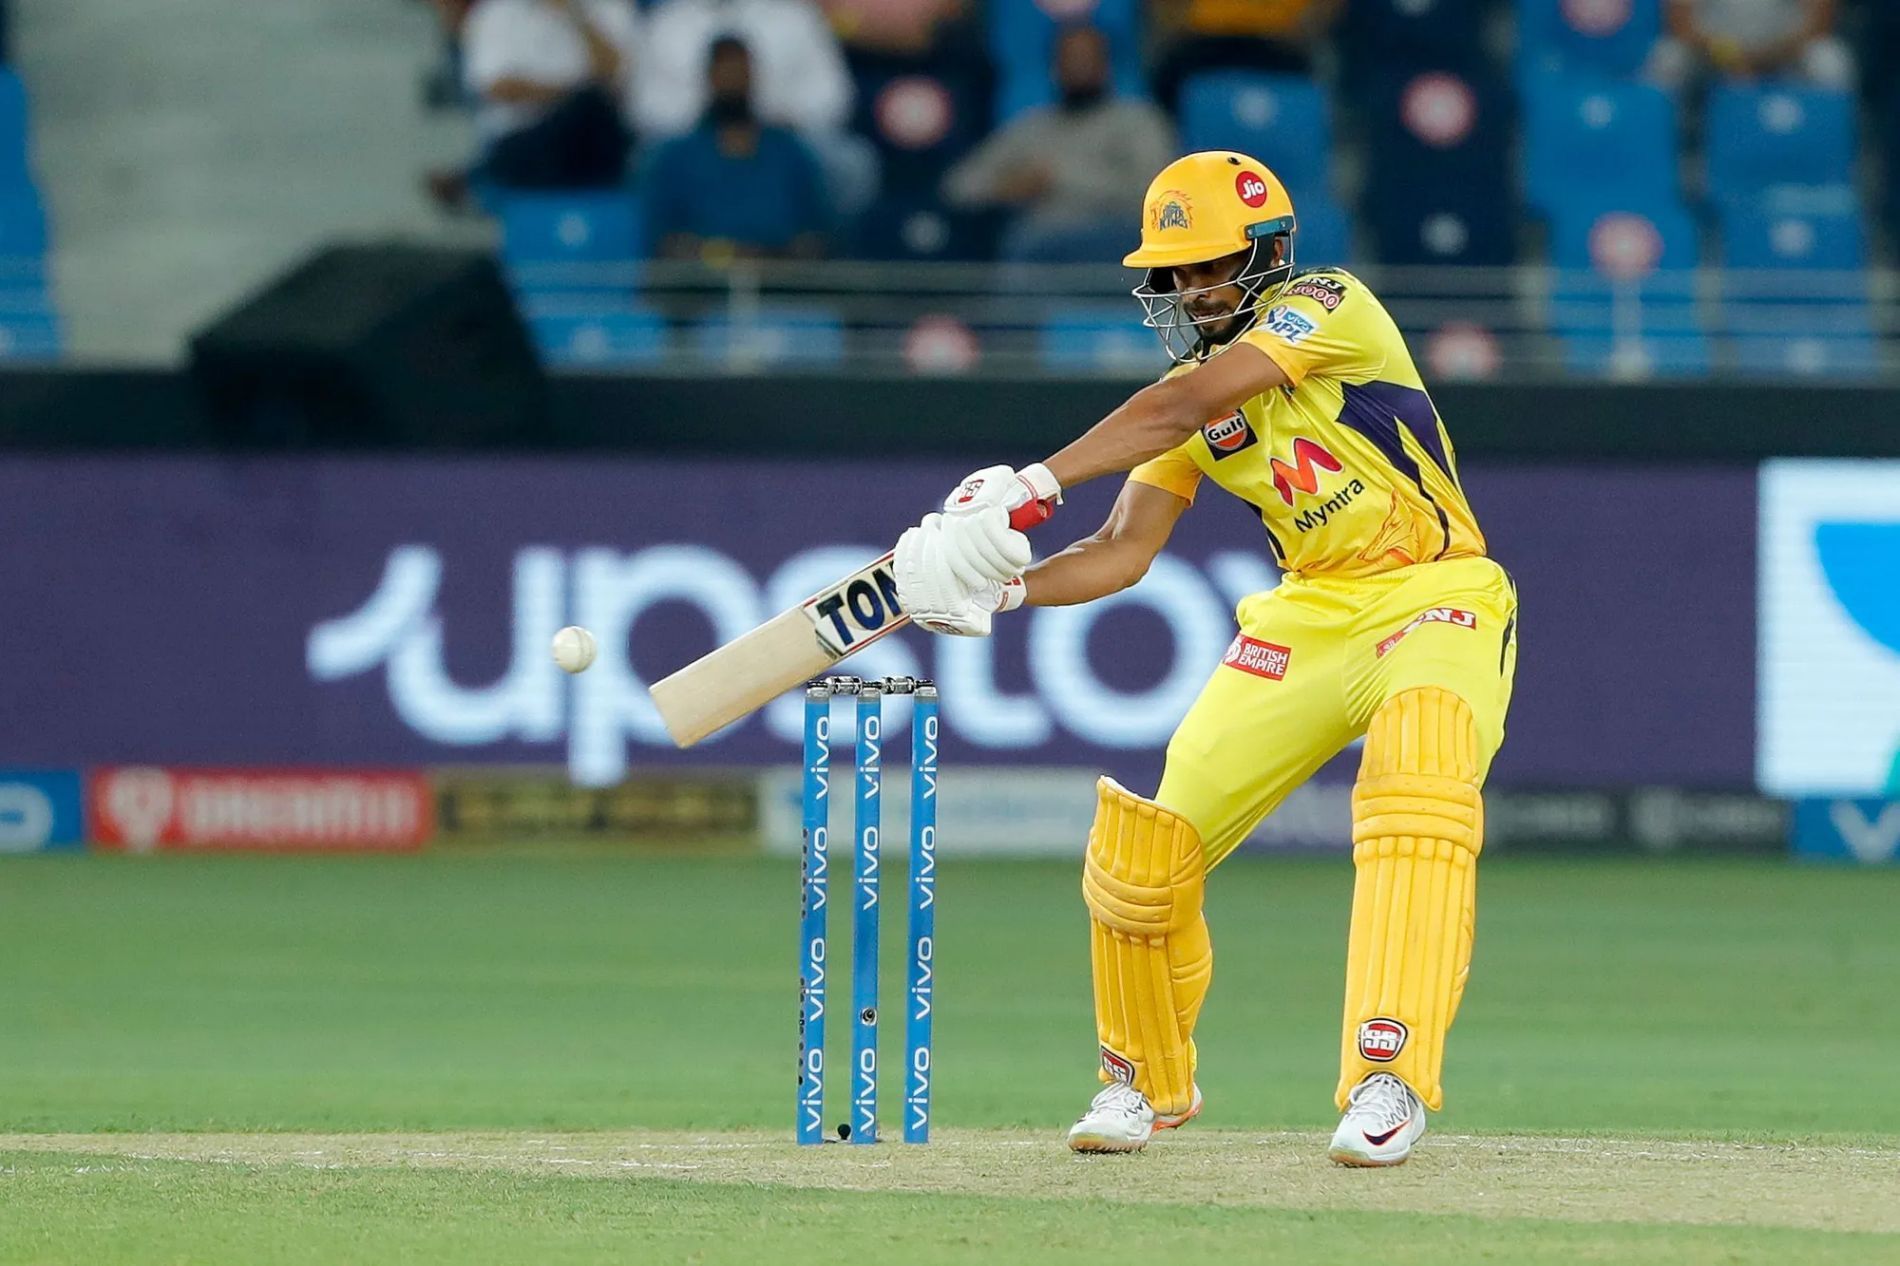 Young Ruturaj Gaikwad is the cornerstone of the CSK batting lineup